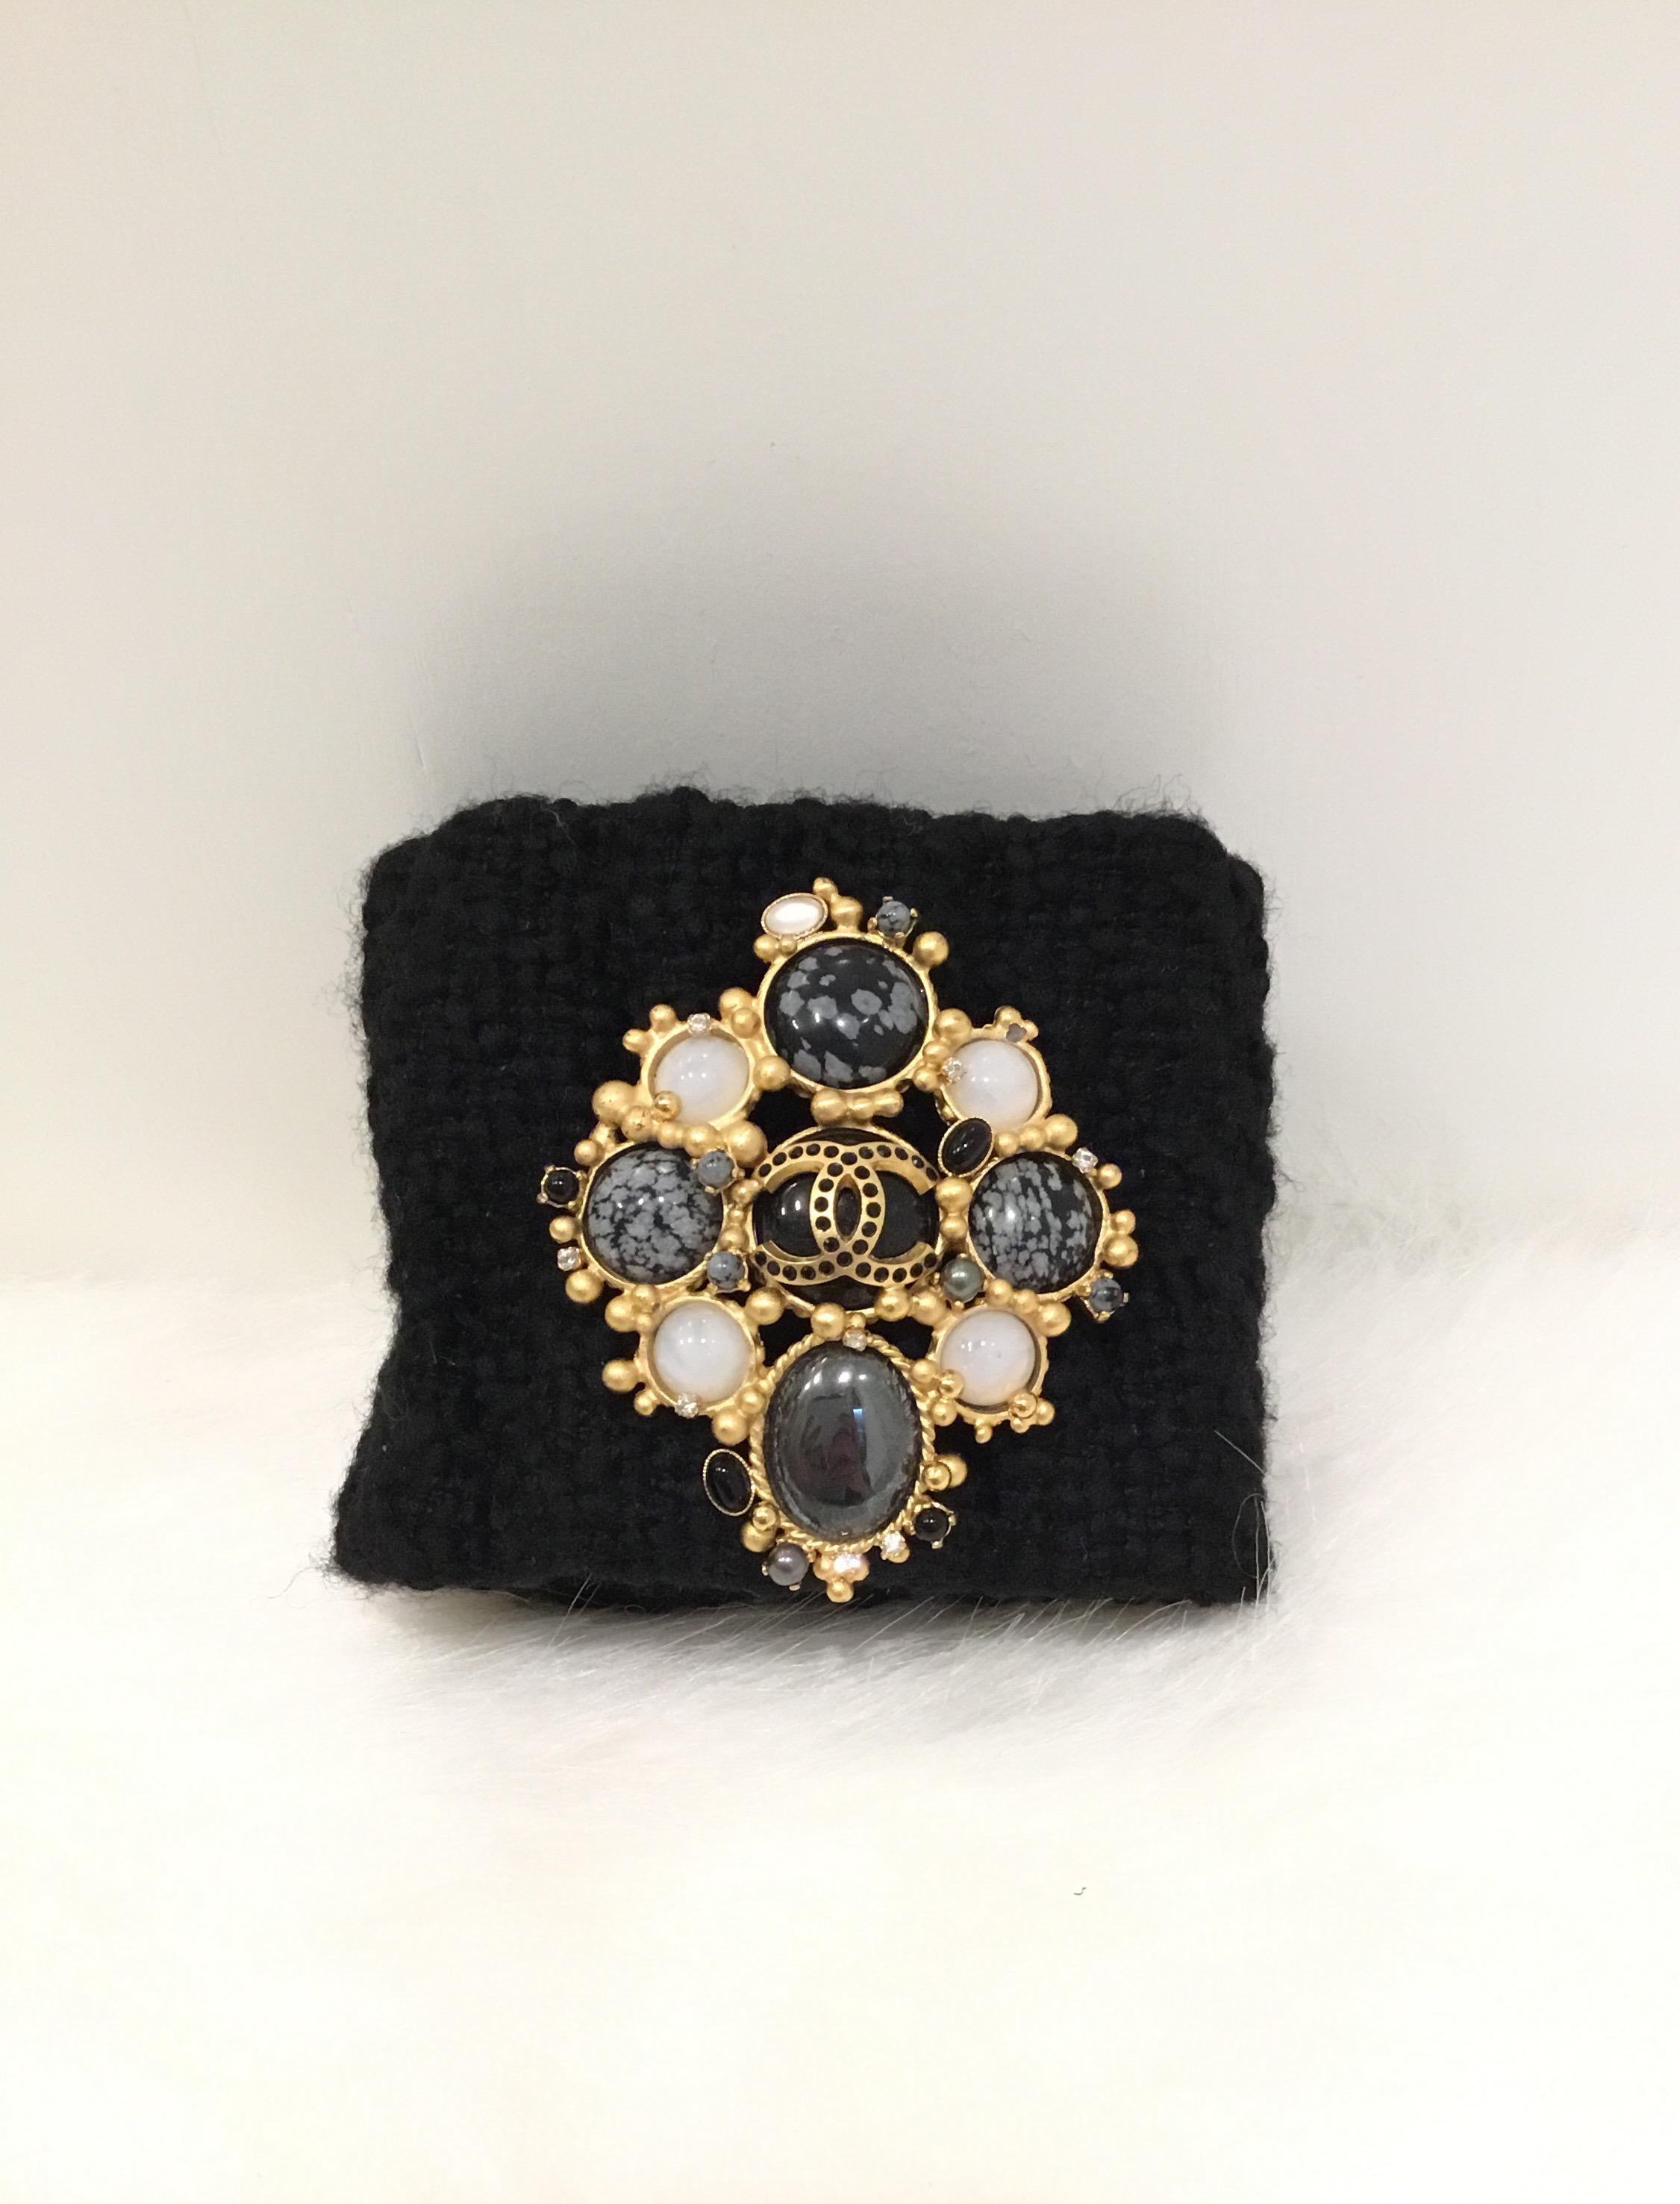 Chanel Black tweed bracelet with a removable brooch with gold-tone hardware. Bracelet has snap closures and lined in leather. 2001 A collection.

Length 8”
Width 3.5”